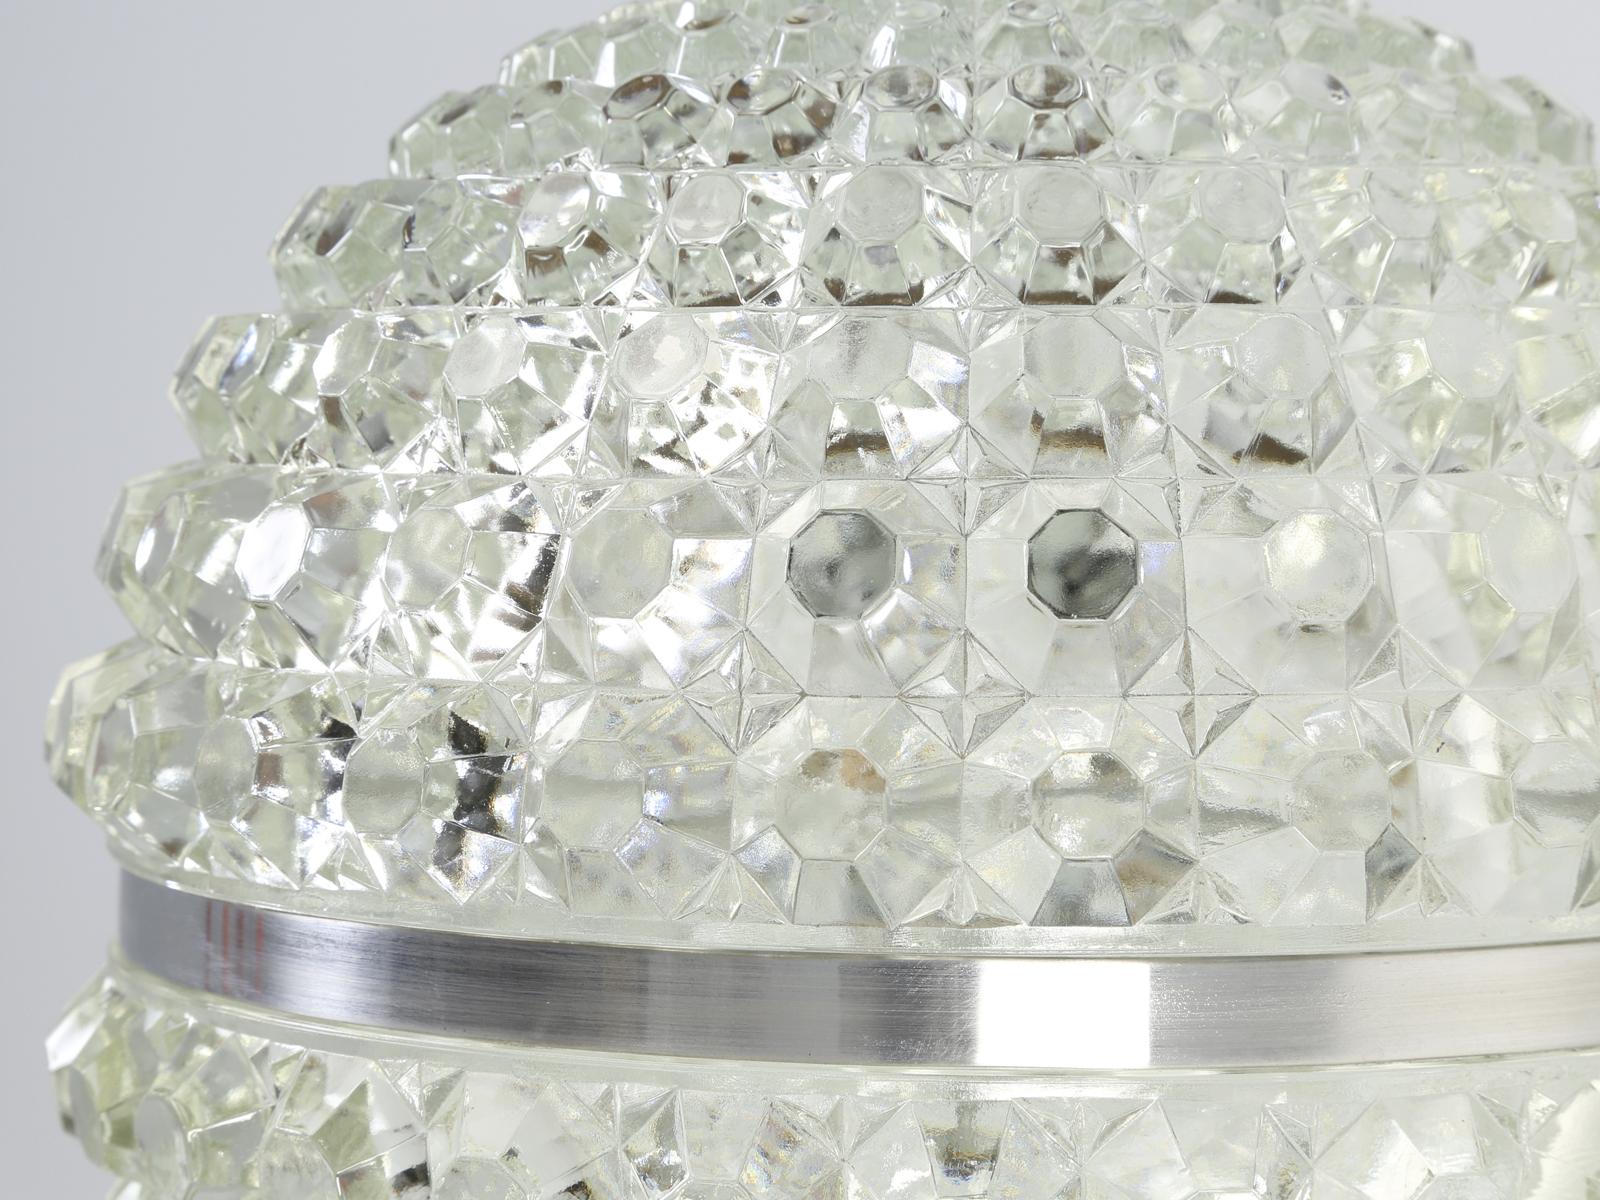 Argentine Mid-Century Modern Crystal Orb Pendant Fixture from Argentina For Sale